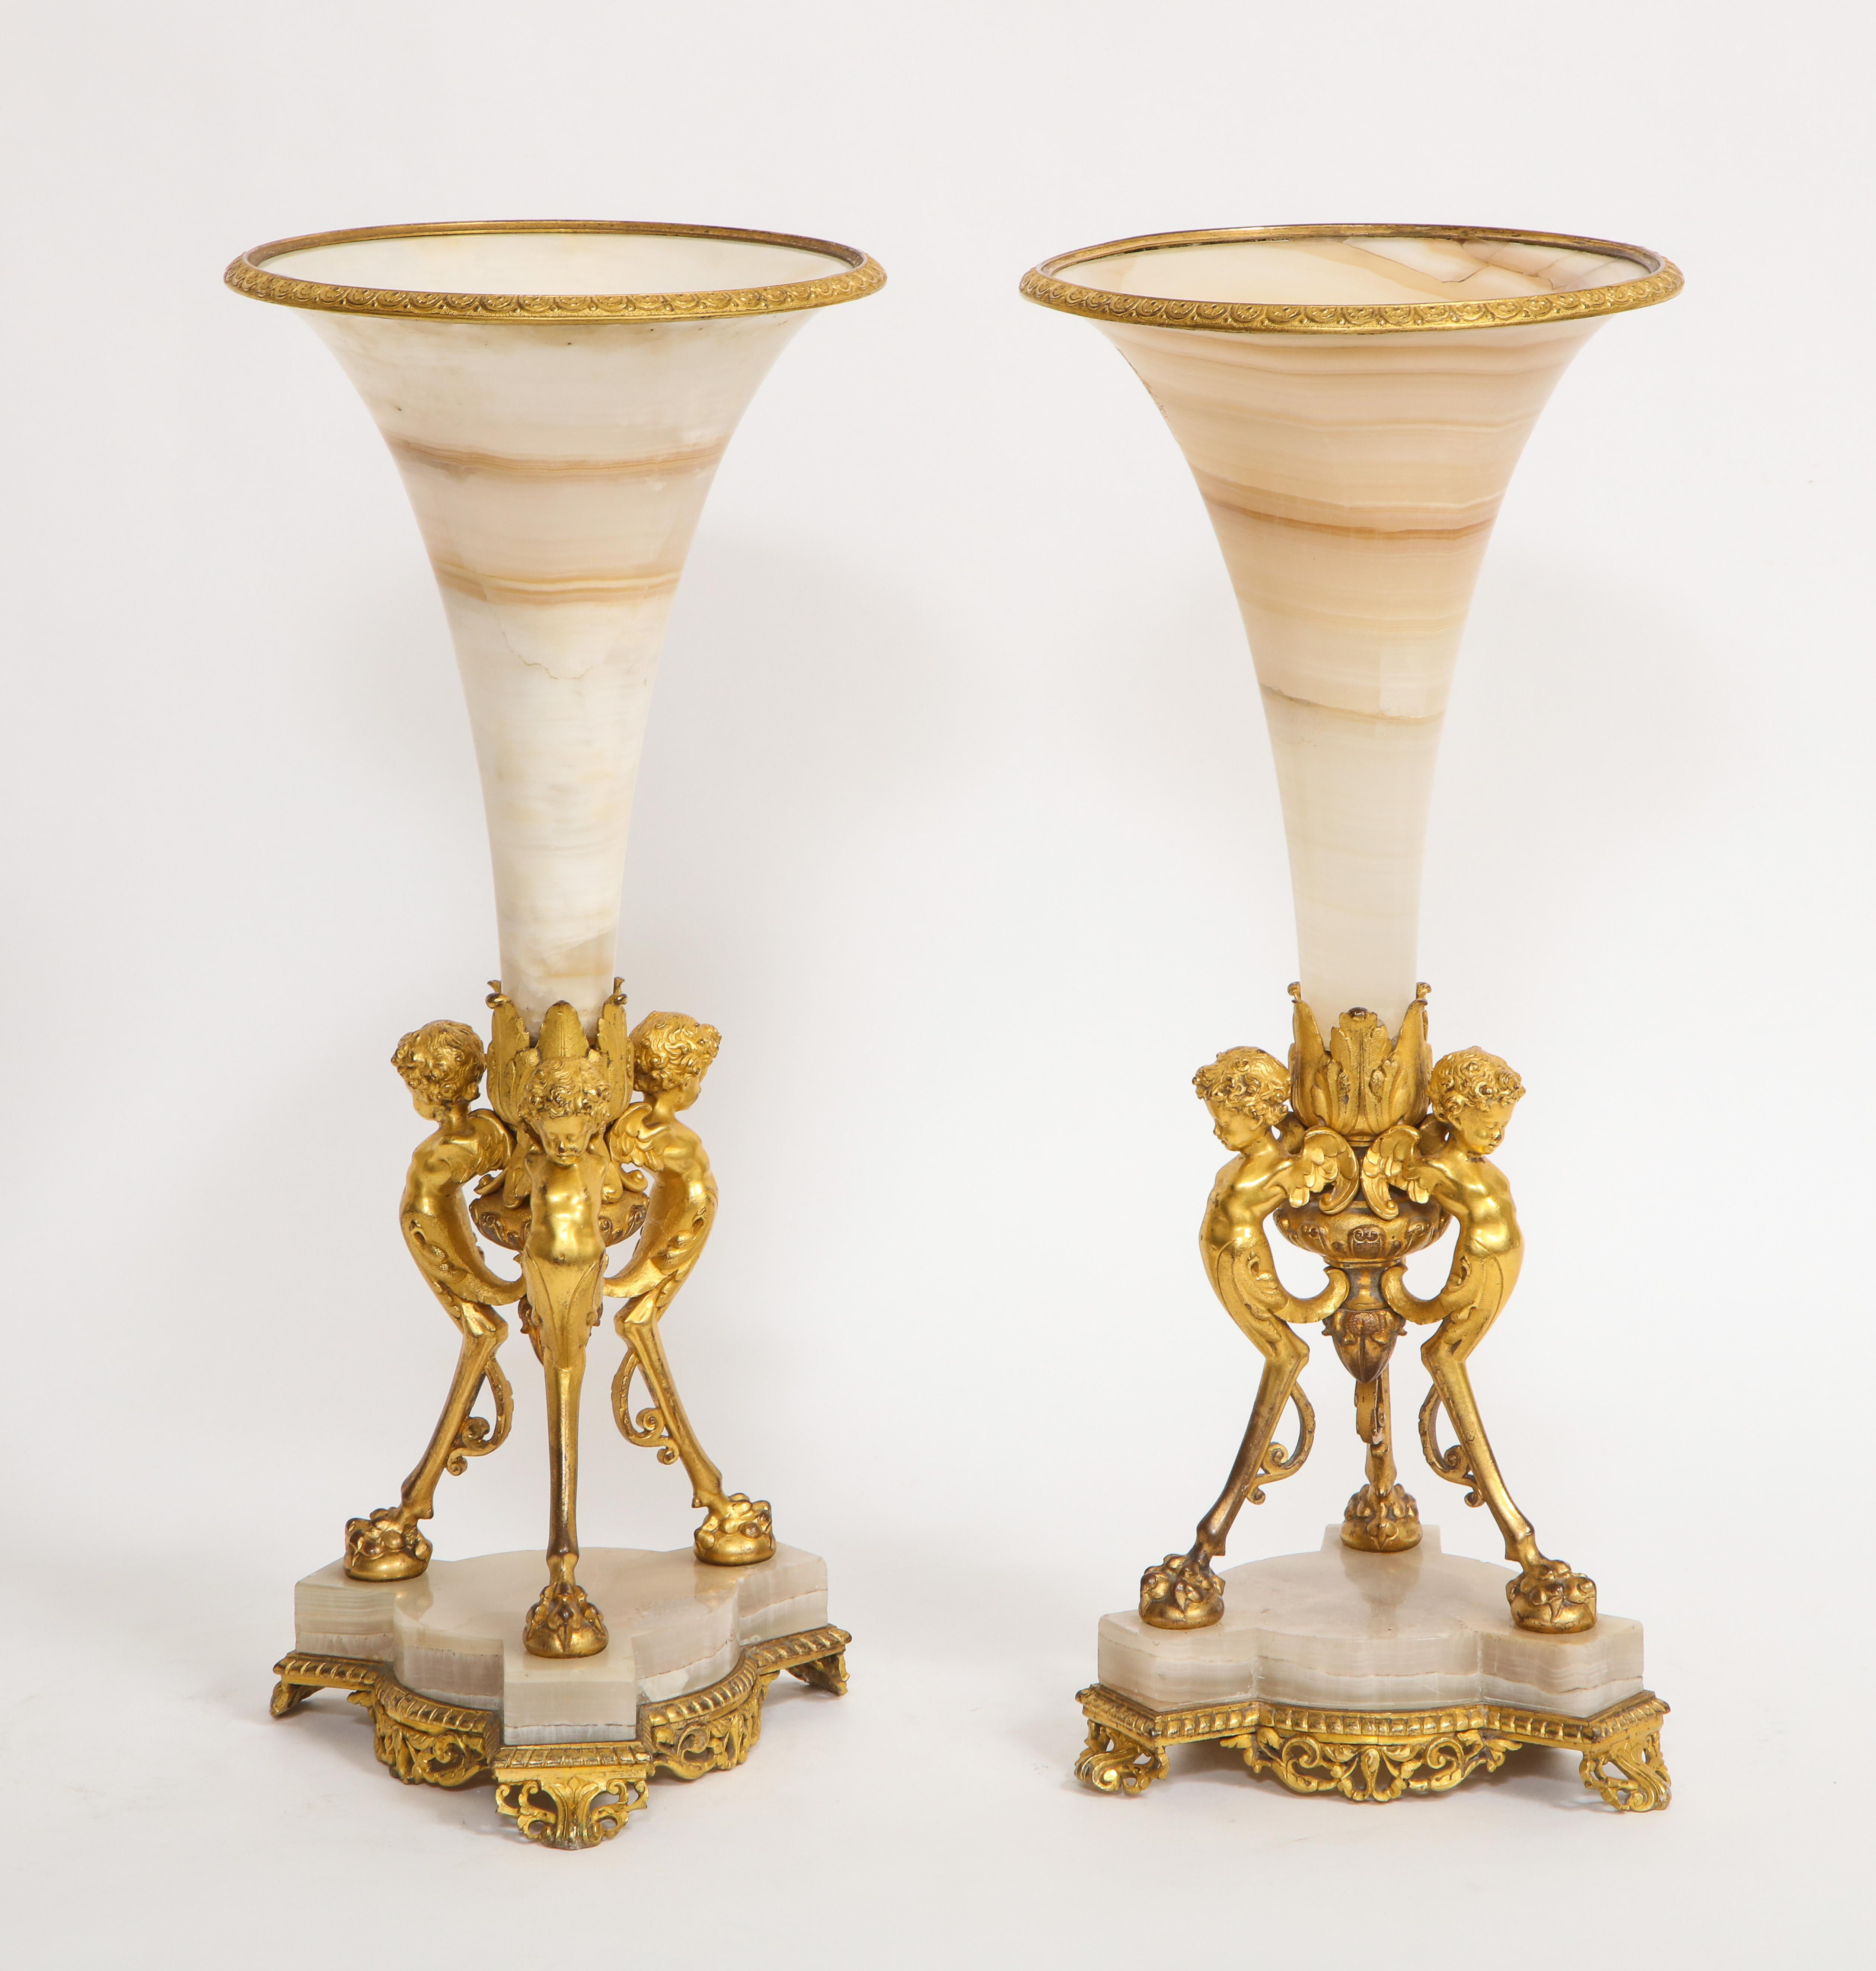 A Fabulous Pair of French 19th Century Figural Dore Bronze Mounted Alabaster Trumpet Vases. Each Egyptian alabaster vase is beautifully hand-carved and hand-polished with the finest stone workmanship. The vases are mounted on incredible quality dore